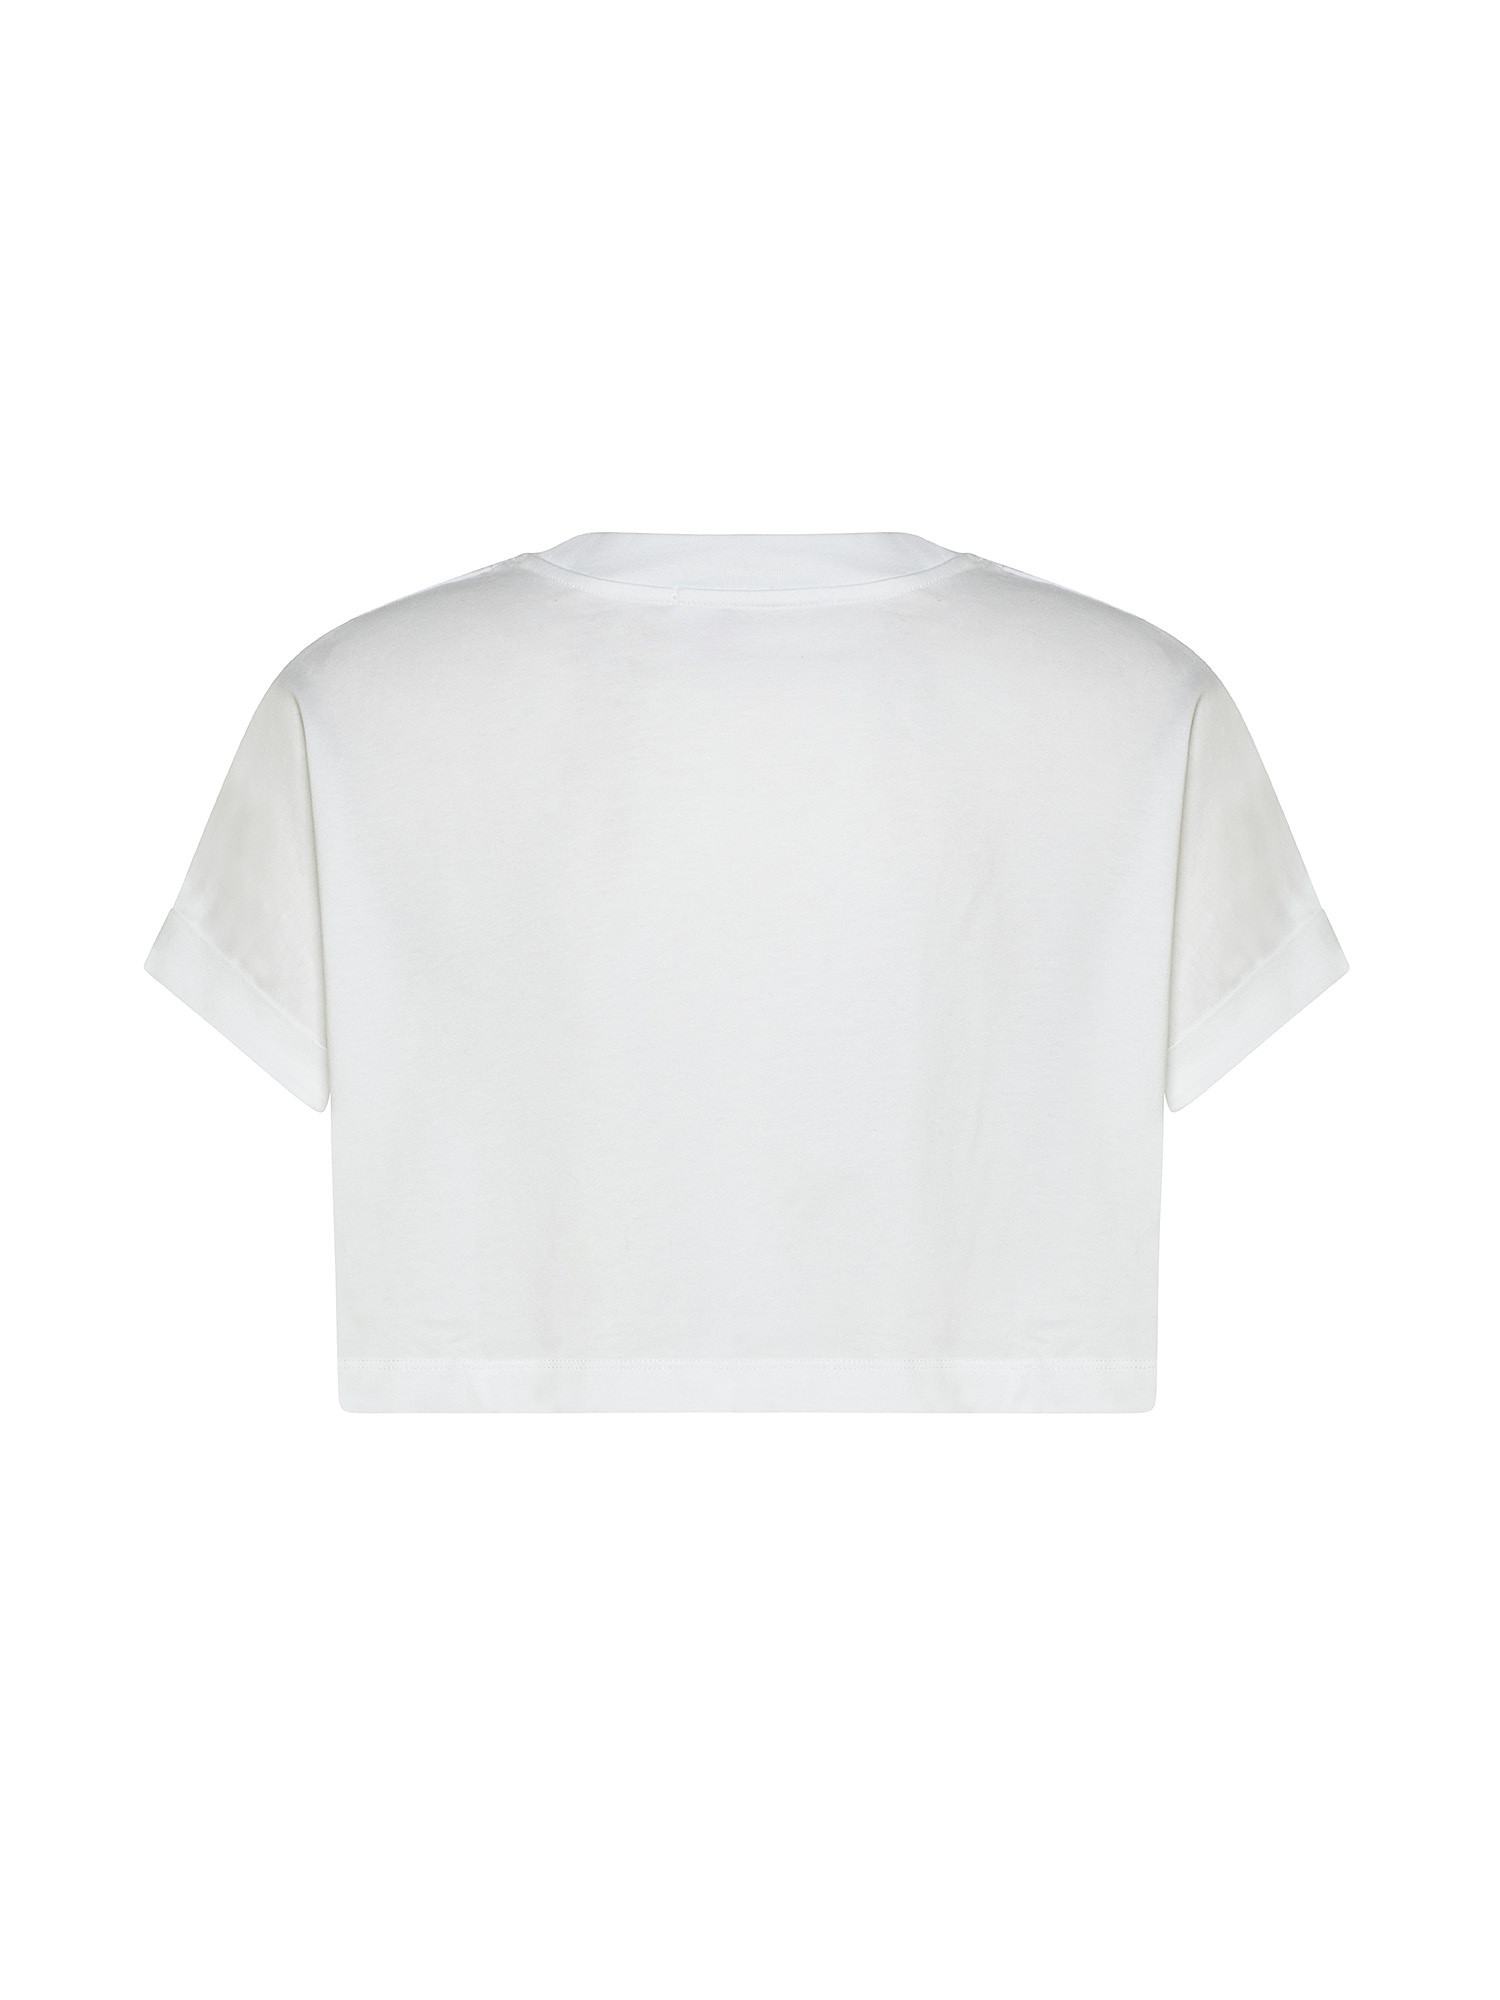 Crop-top with logo, White, large image number 1